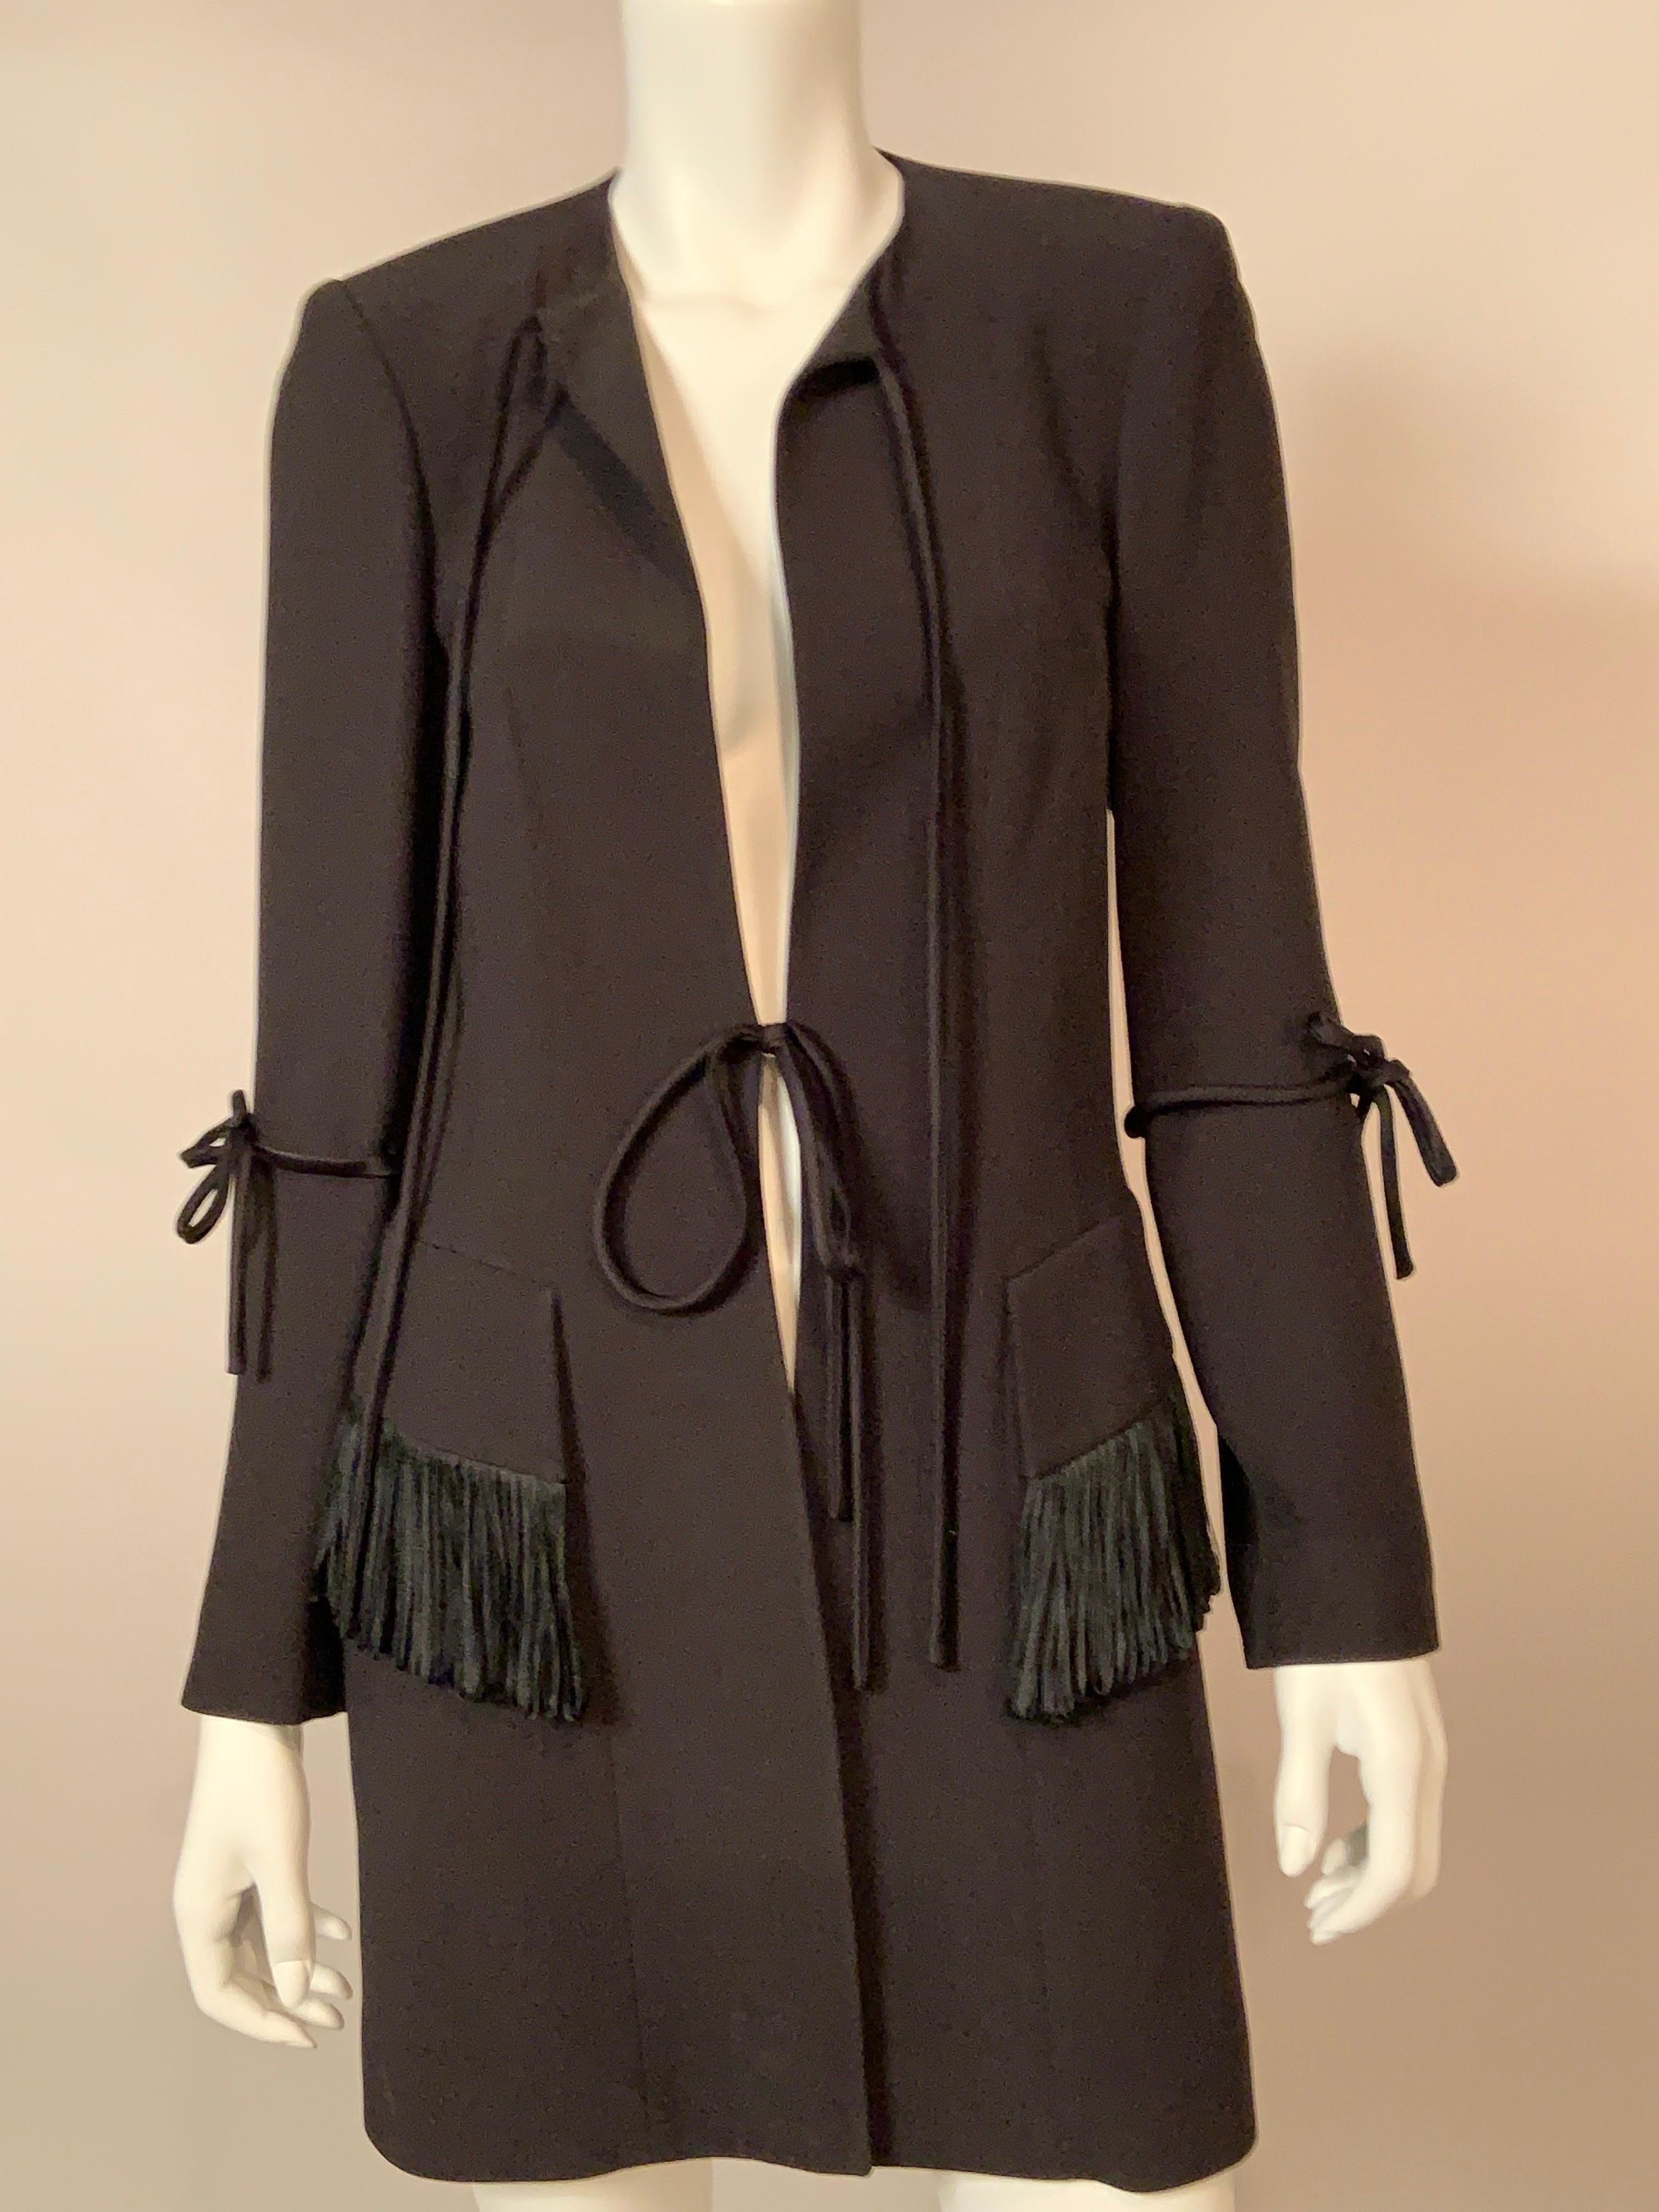 Chloe Black Silk Evening Suit with Satin Trim Skirt with Very High Side Opening 5